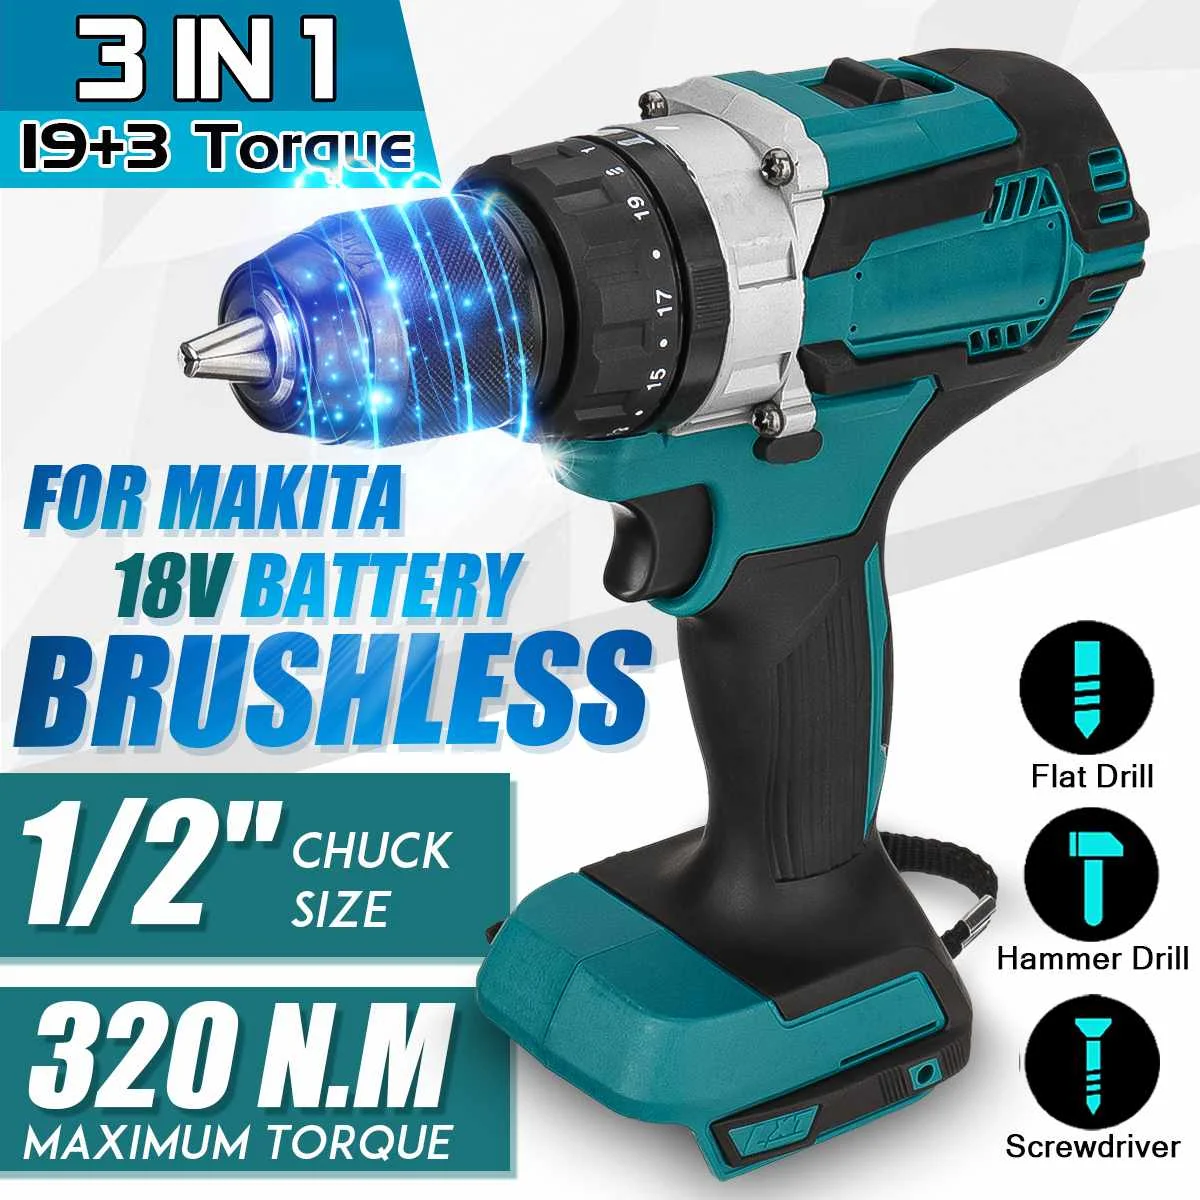 

3IN1 Electric Cordless Drill Brushless 4000RPM 13mm Electric Power Screwdriver Drill Useful Repair Tool For Makita 18V Battery